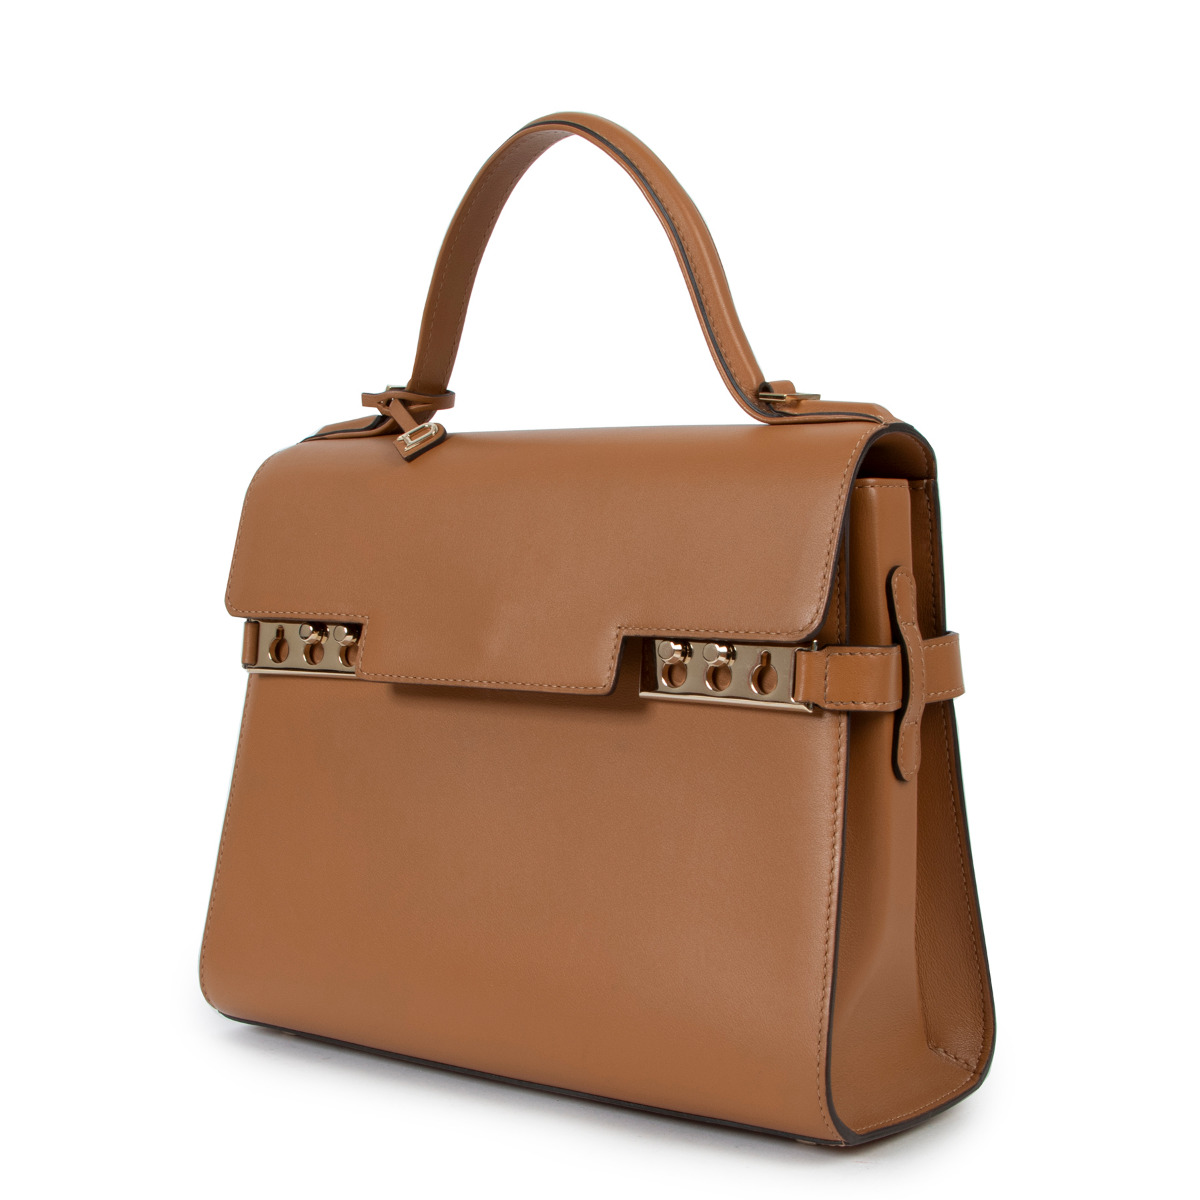 Delvaux Tempete Top Handle Bag Leather MM Brown 405711